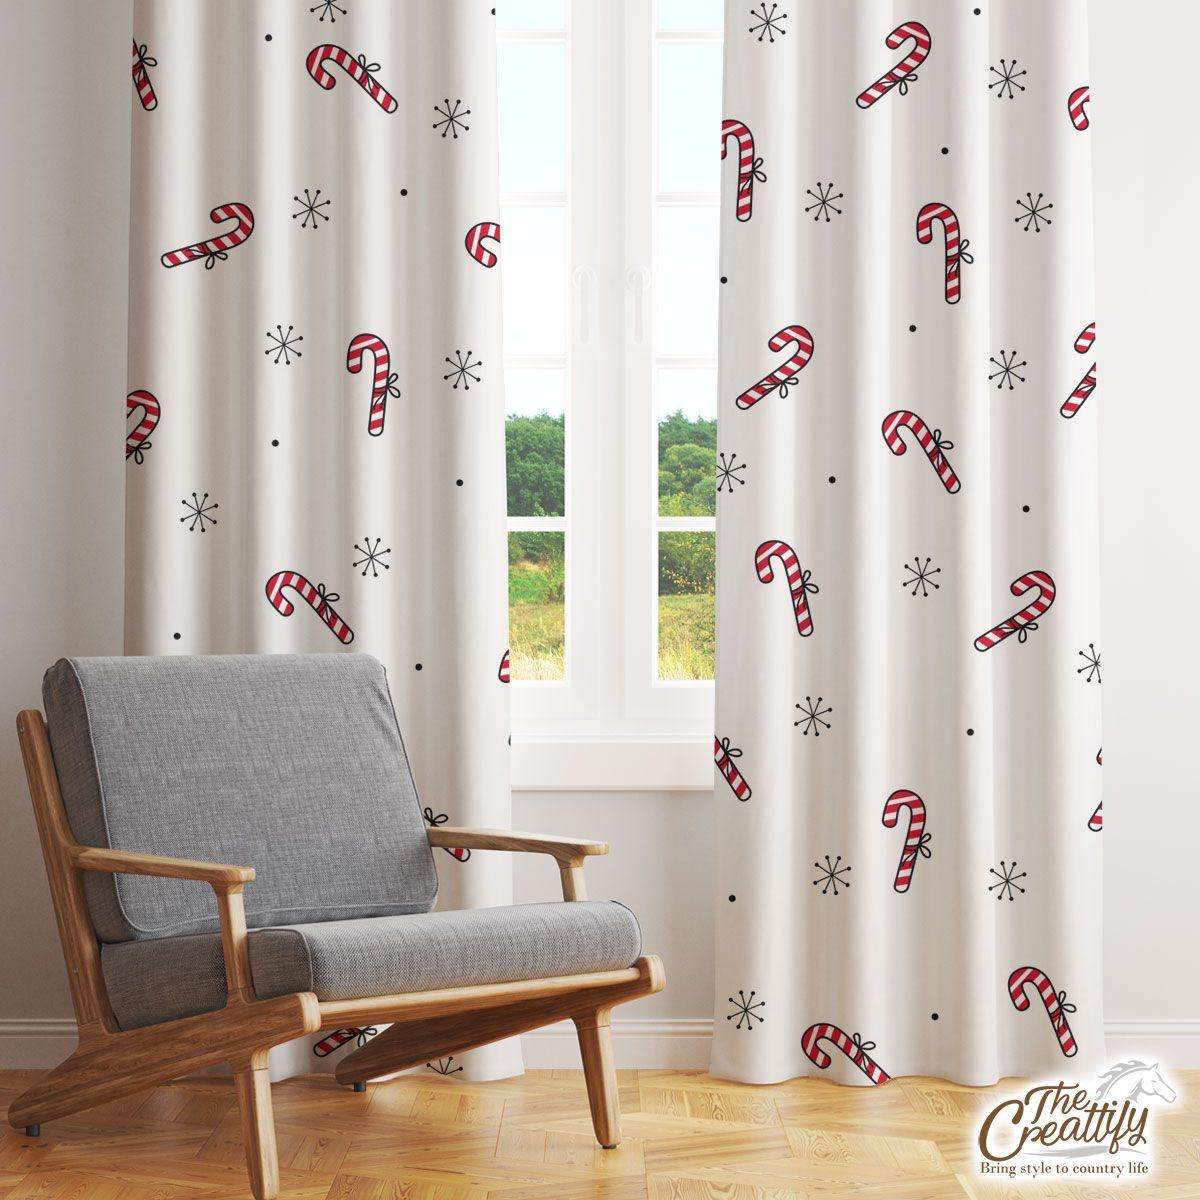 Hand Drawn Candy Canes, Snowflake Clipart Seamless White Pattern Window Curtain